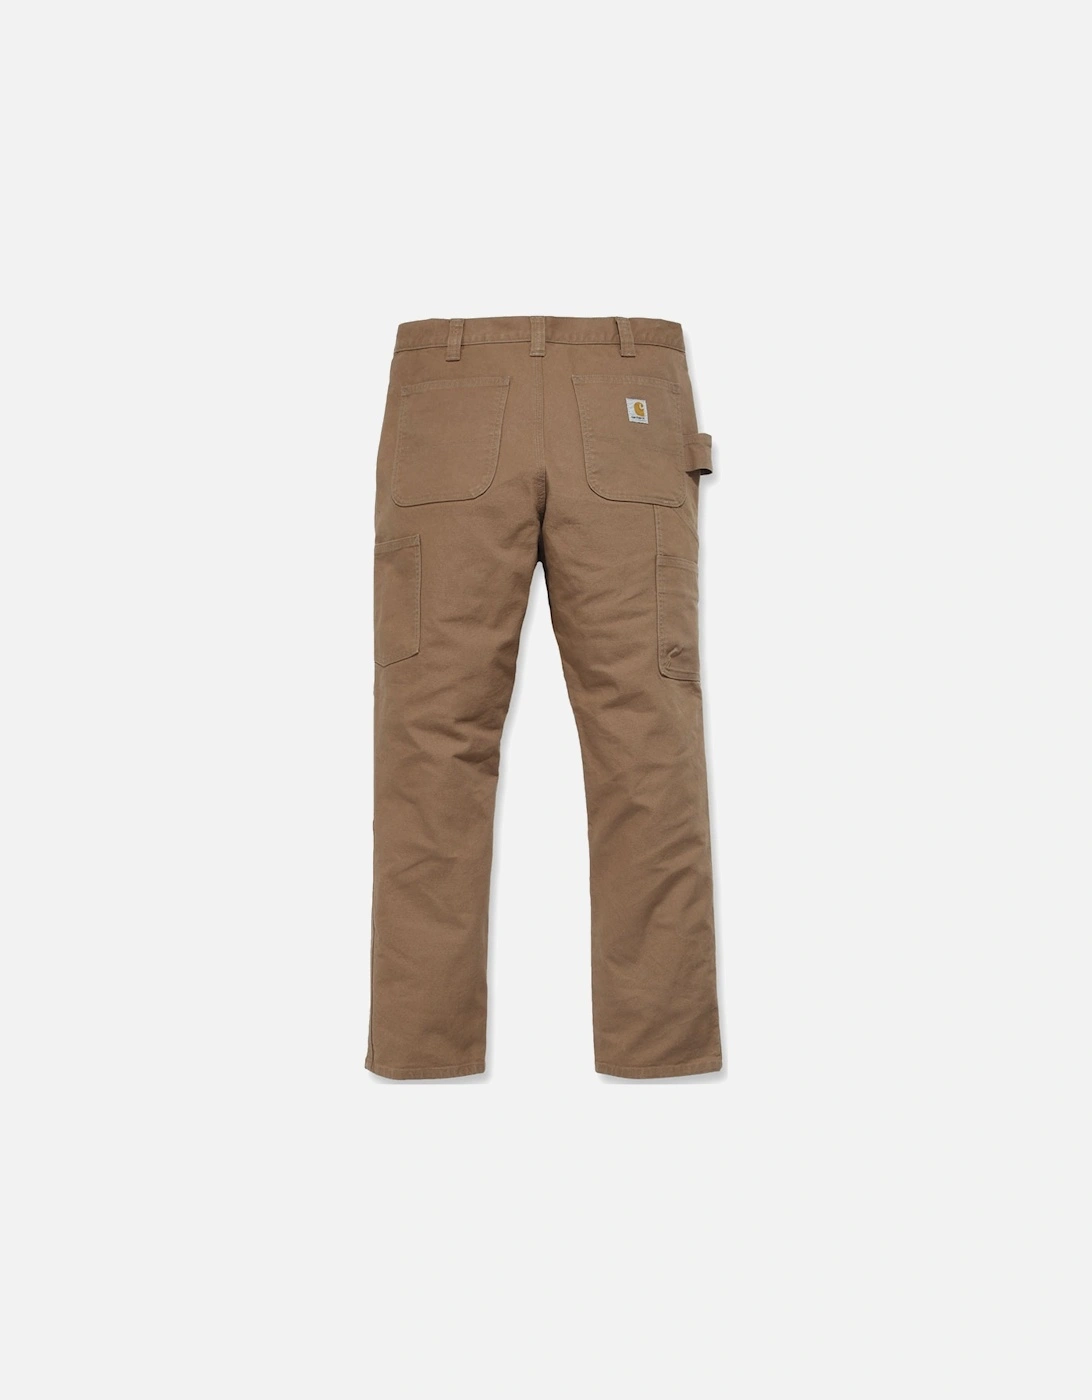 Carhartt Mens Stretch Duck Dungaree Rugged Chino Trousers